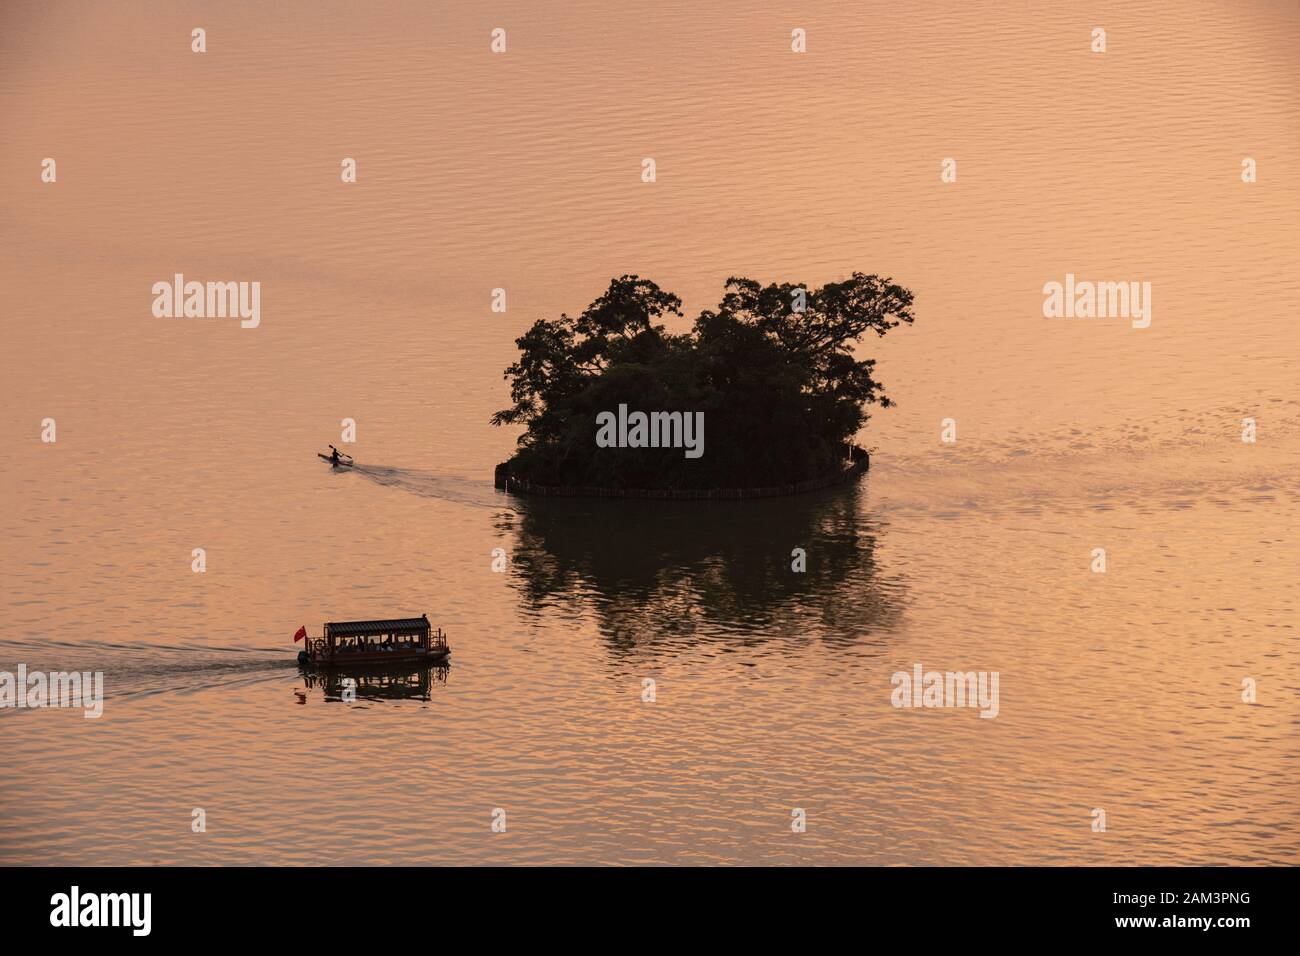 A boat and a lone canoeist paddle towards an island at sunset in the Seven Star Crags national park, near zhaoqing, People's Republic of China Stock Photo